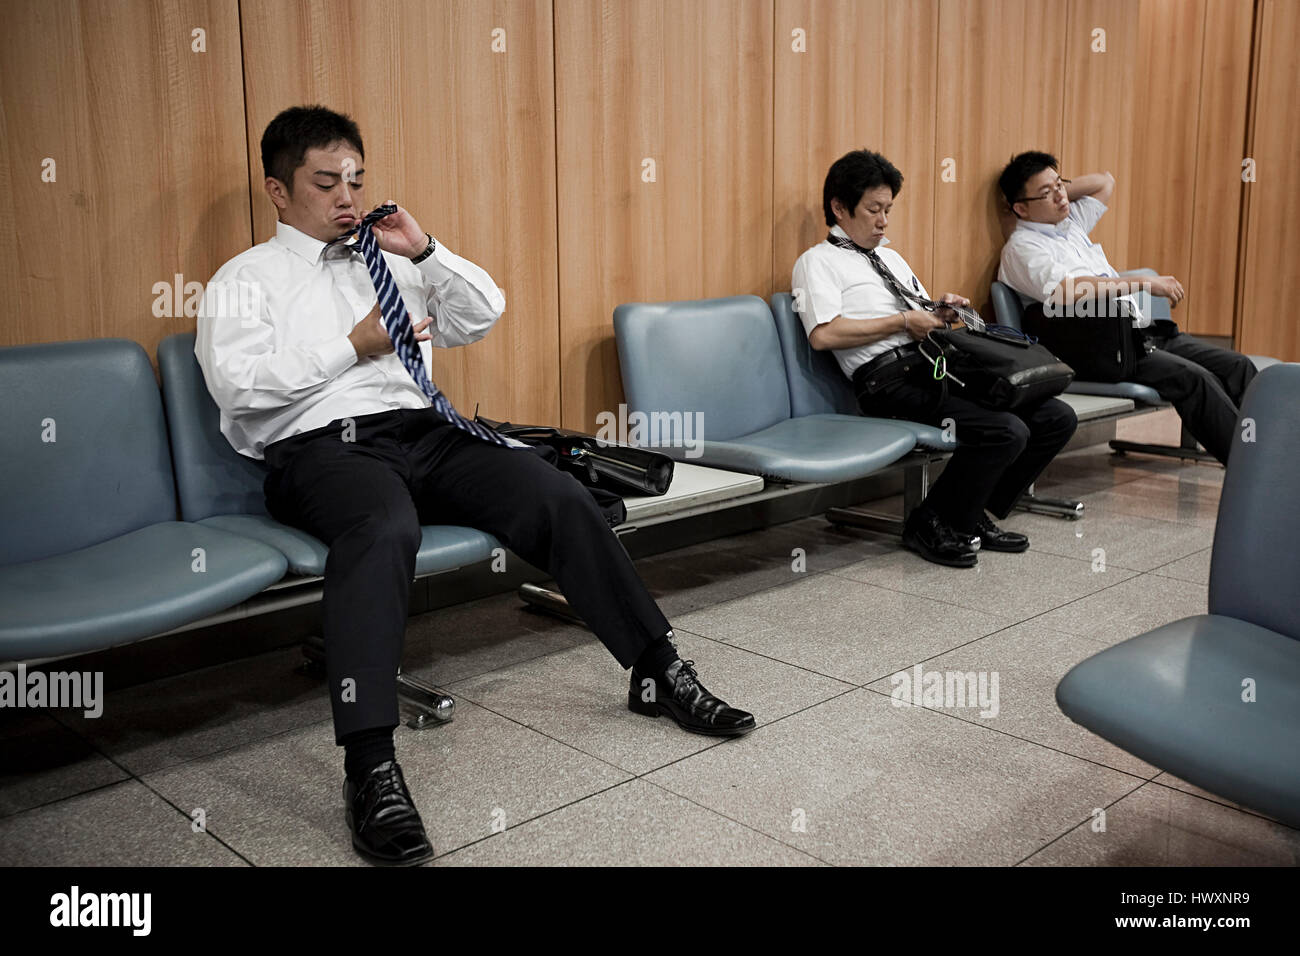 Business men waiting for the train and using the time to bind a tie, Japan. Stock Photo